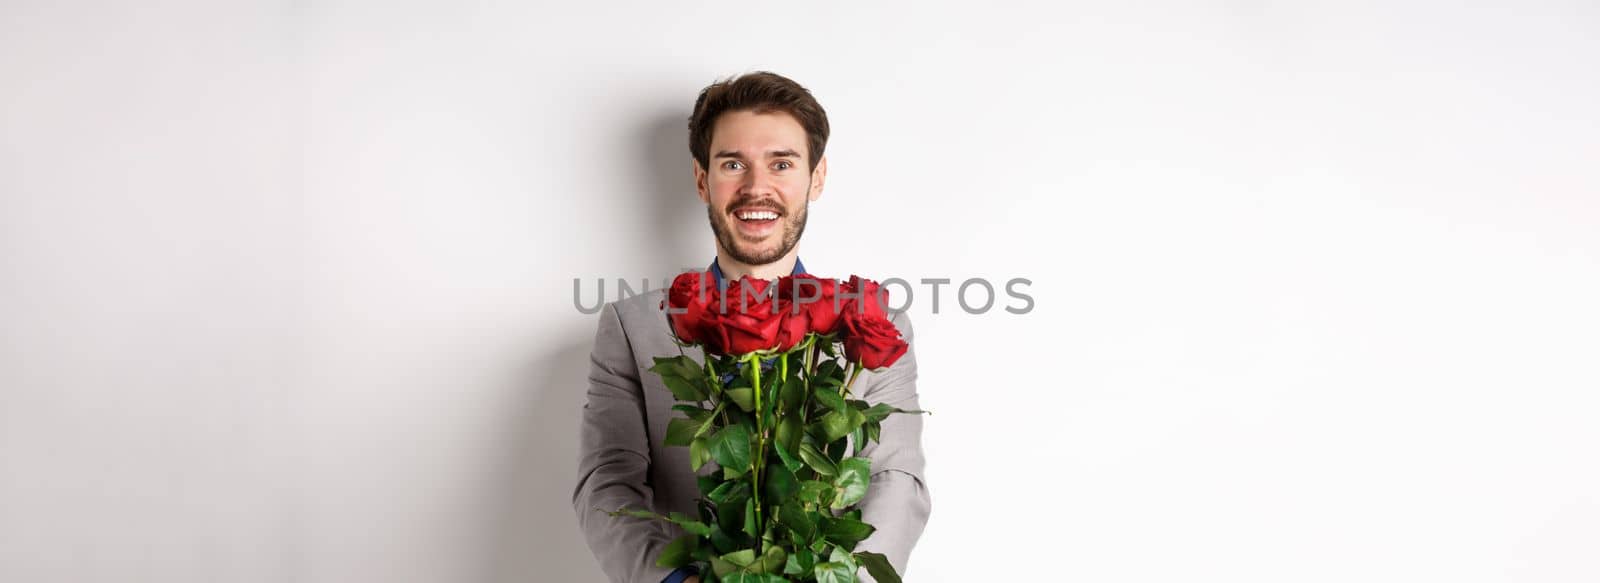 Handsome man in love wishing happy valentines day, giving bouquet of flowers on romantic date, smiling at camera, wearing suit over white background by Benzoix